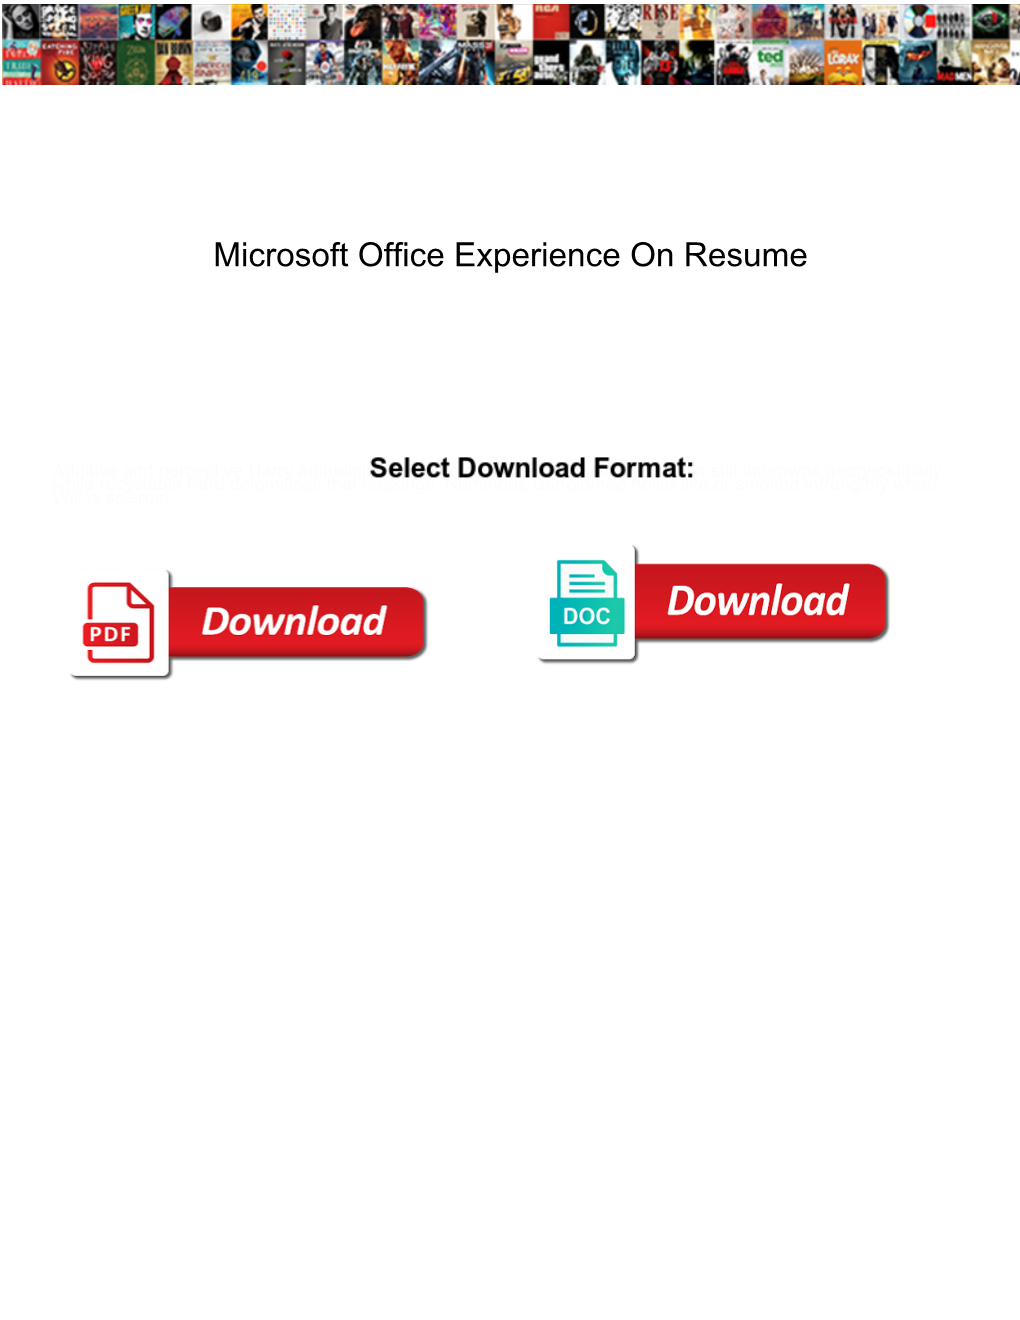 Microsoft Office Experience on Resume